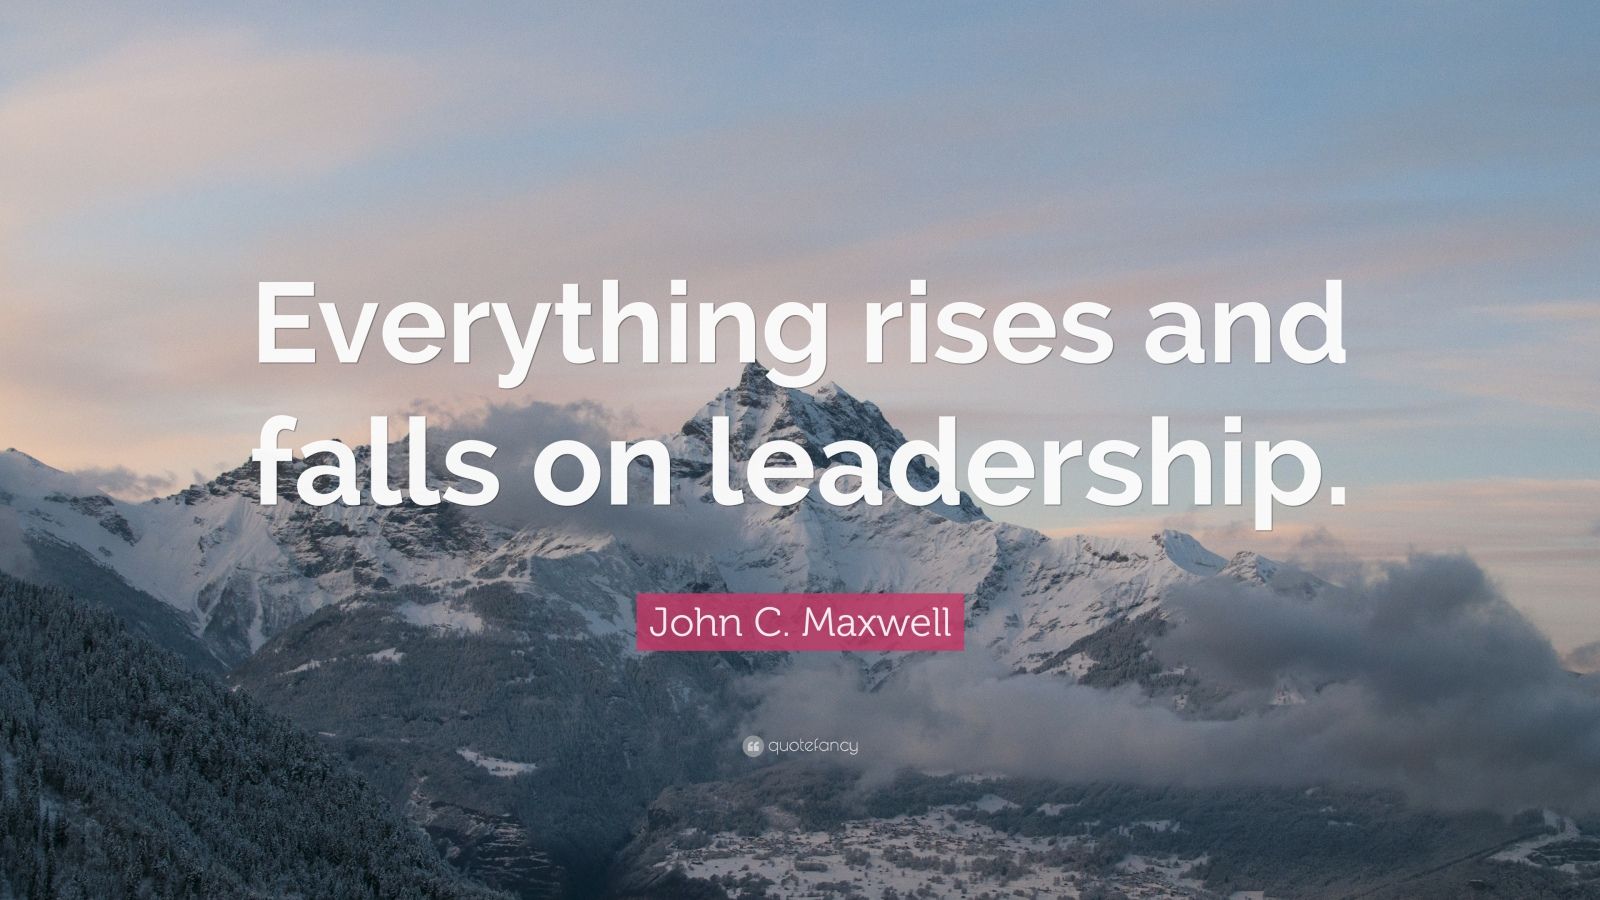 John C. Maxwell Quote: “Everything rises and falls on leadership.” (12